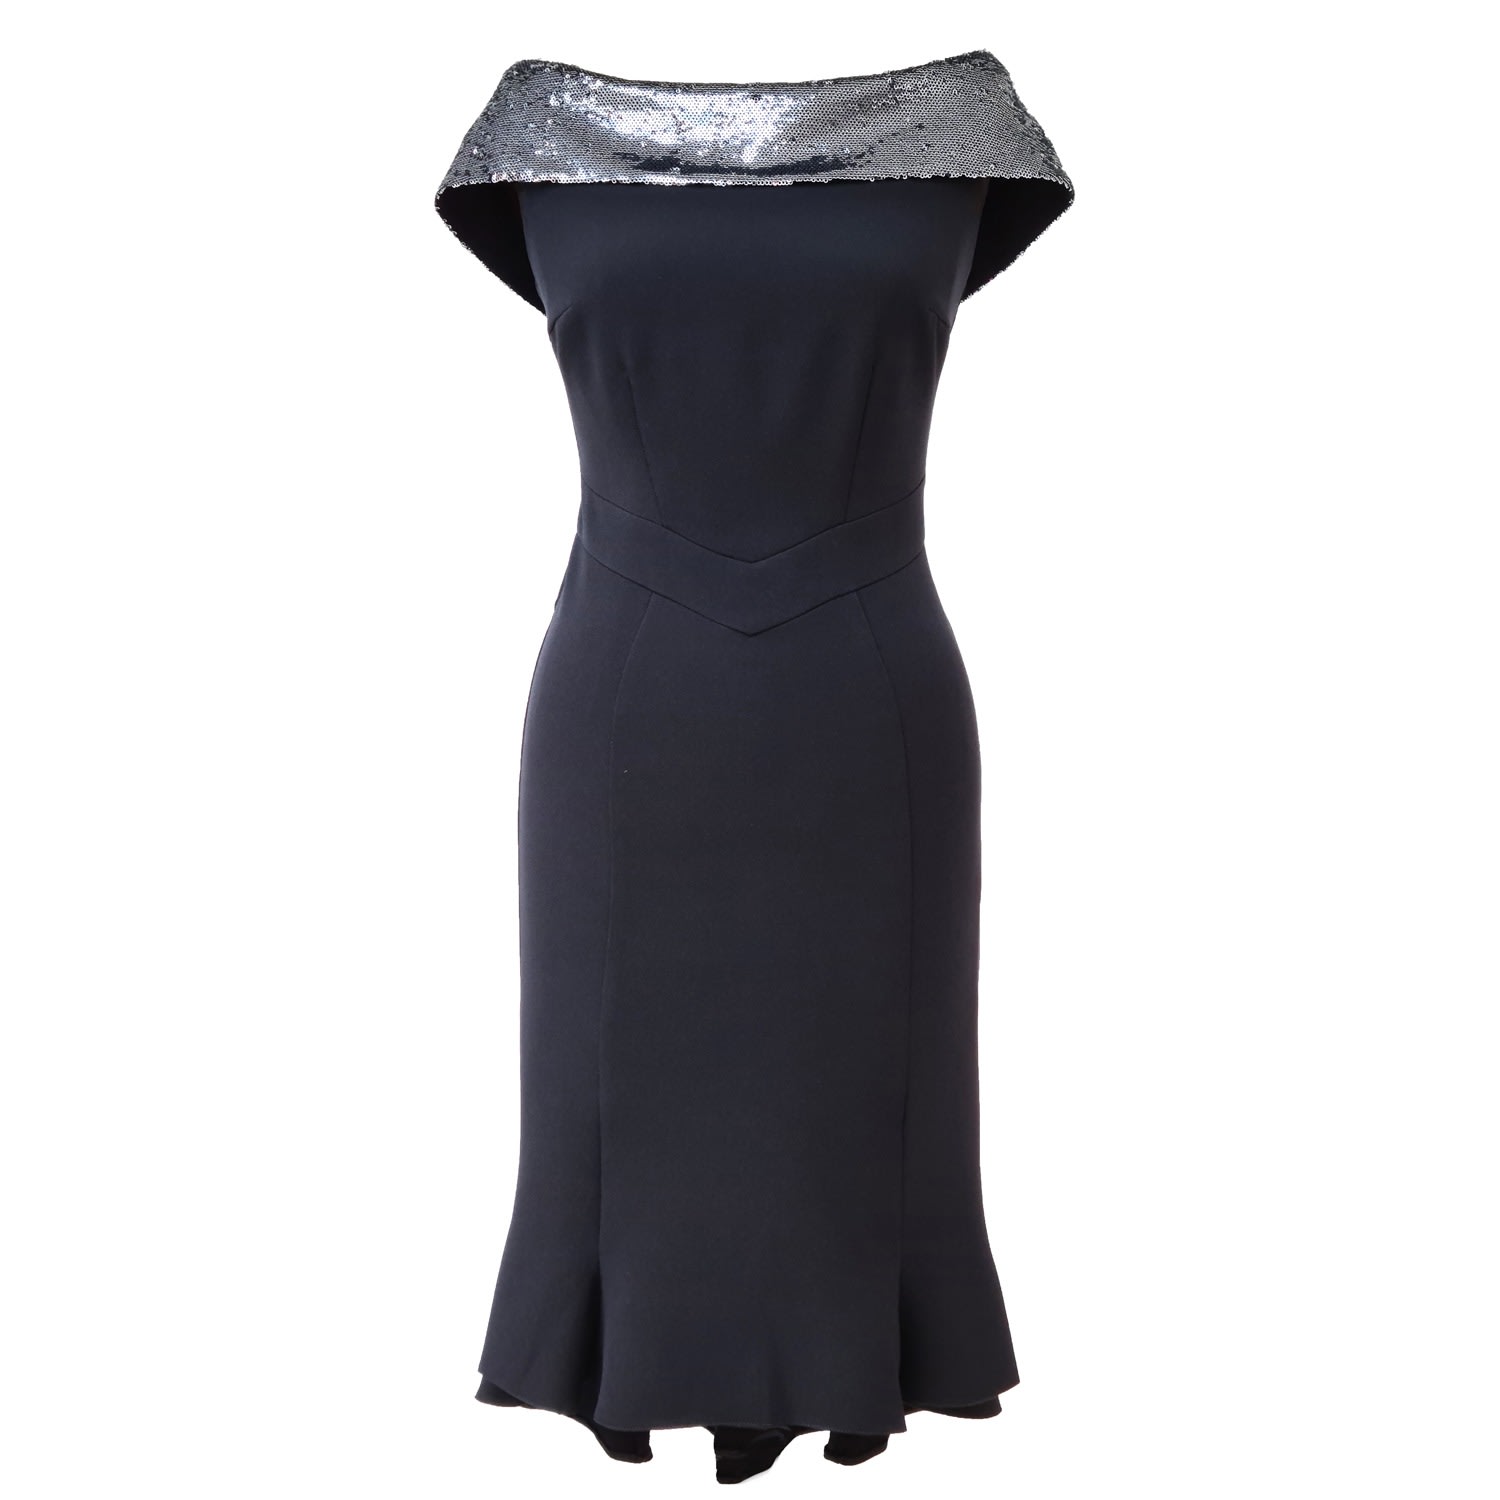 Women’s Sweet Pea Black Dress And Silver Sequins Collar Small Mellaris